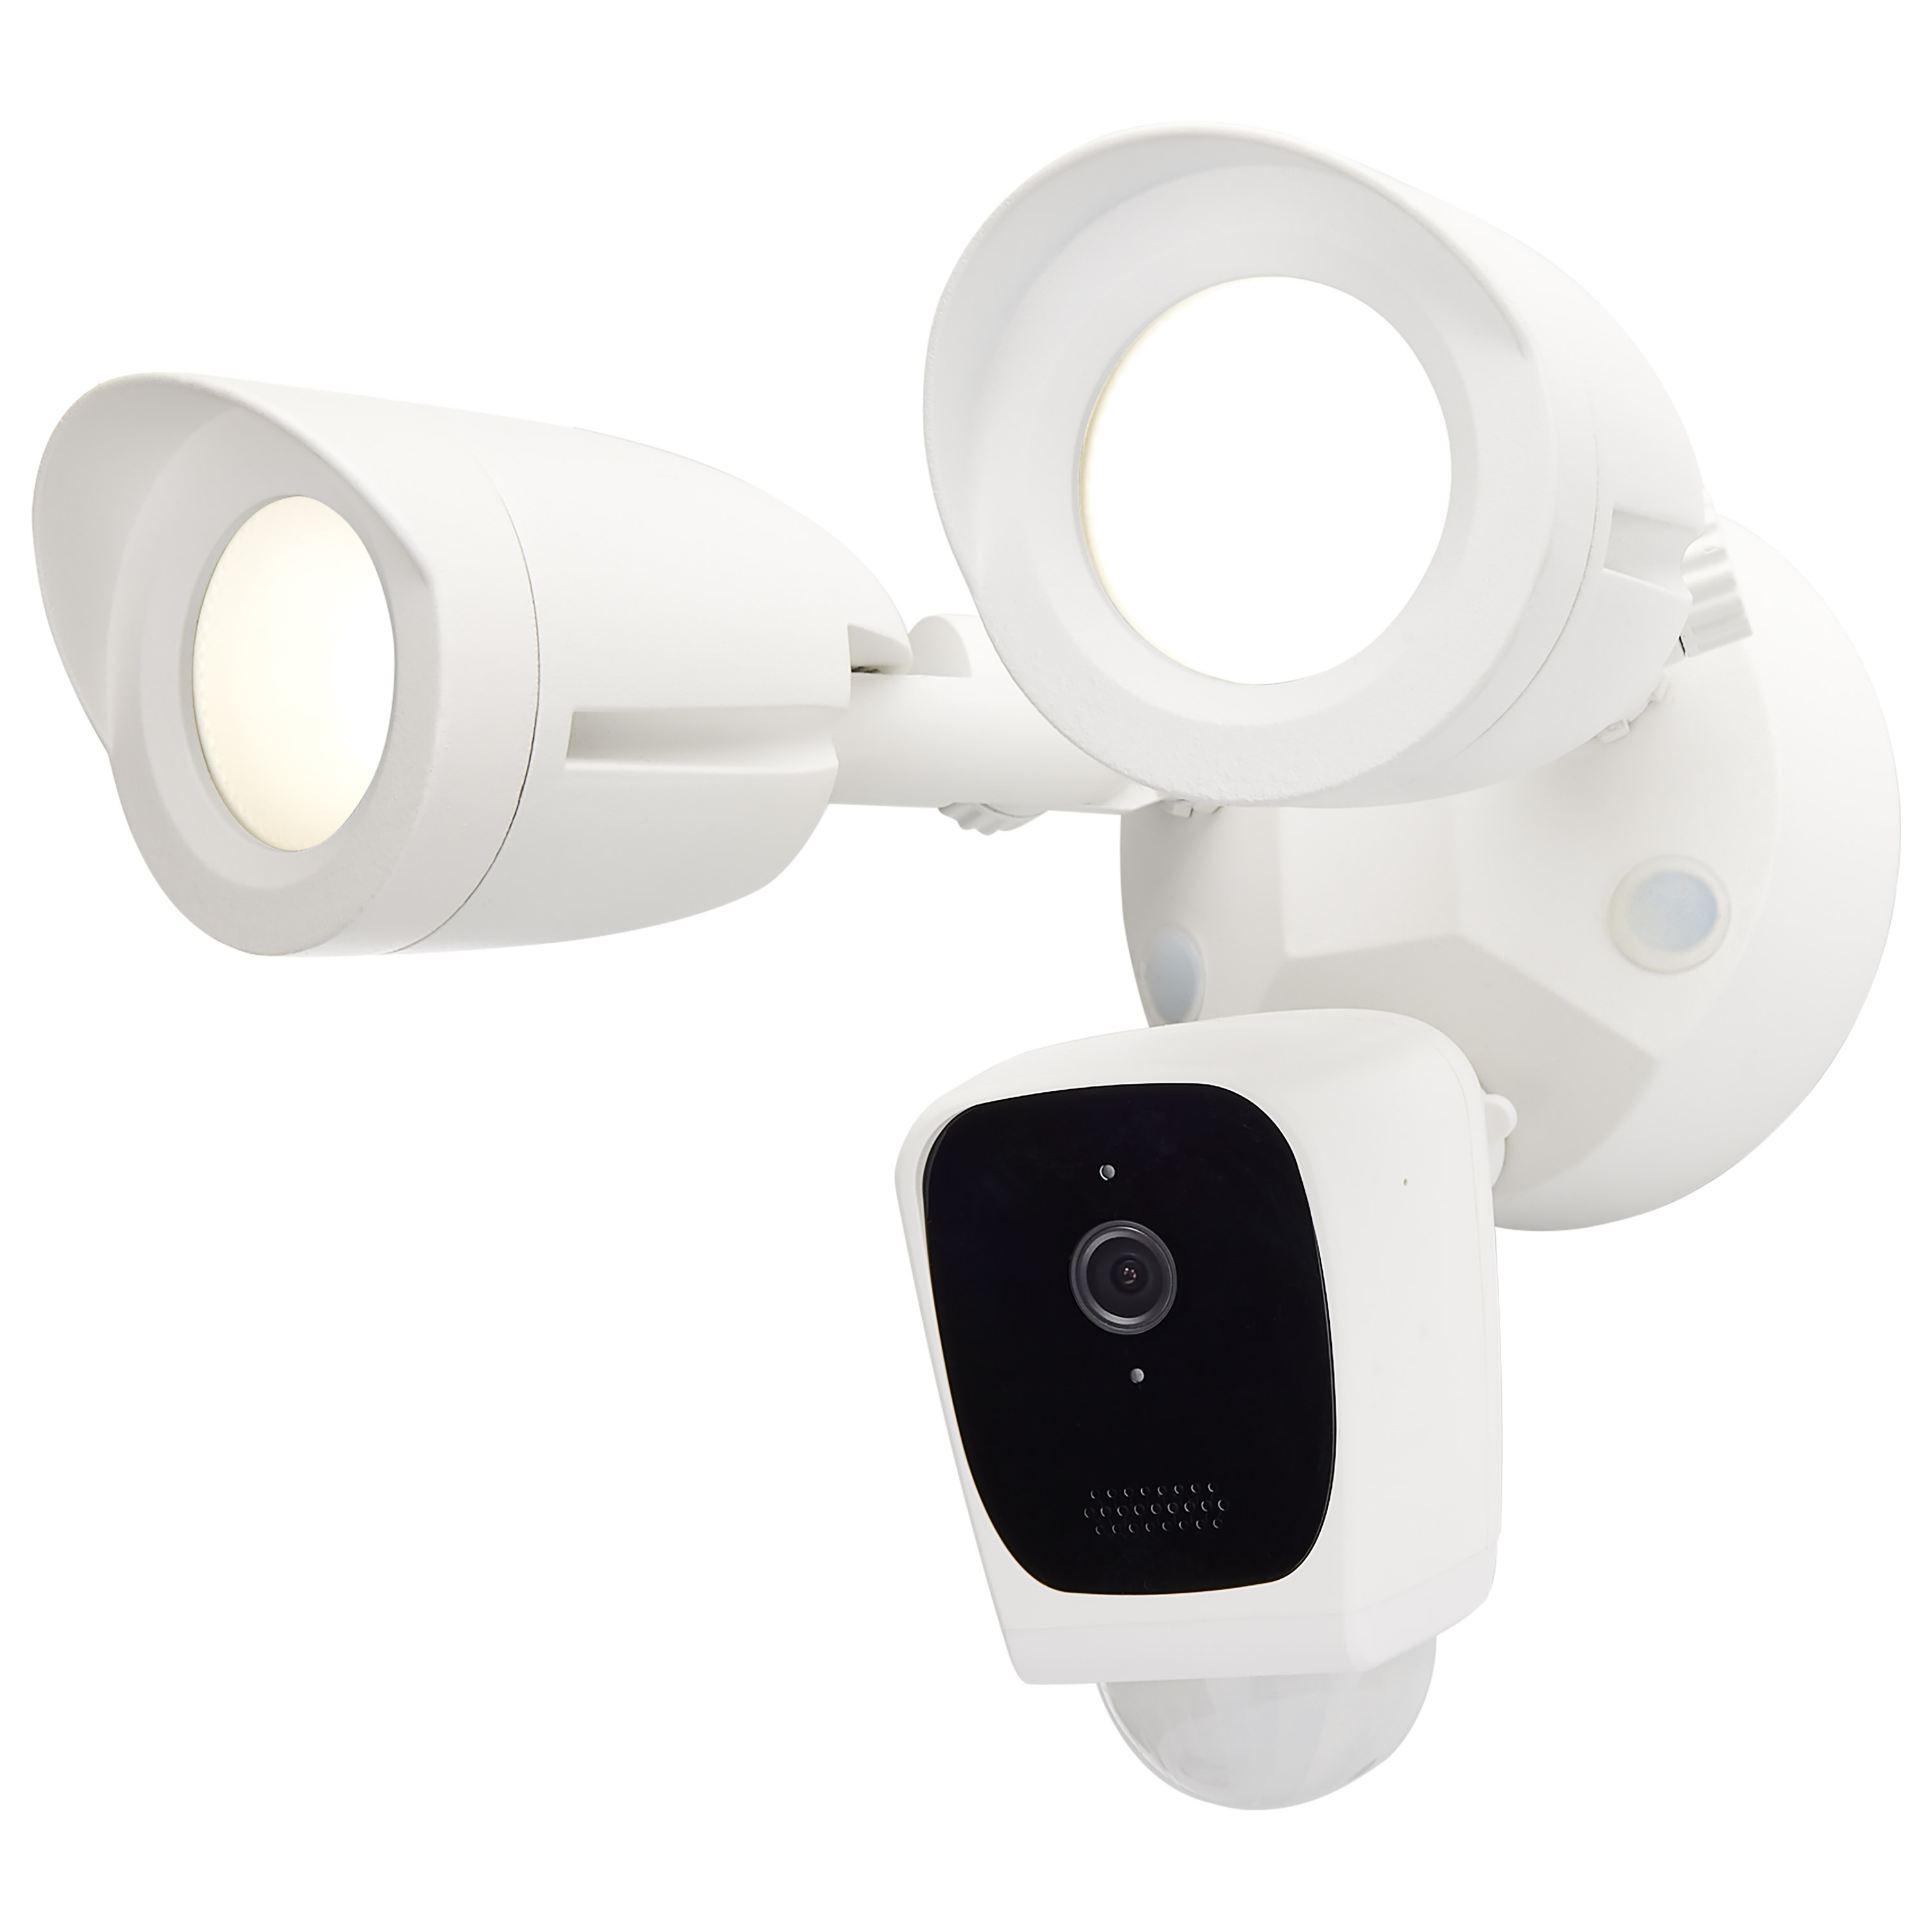 SAT 65-900 BULLET OUTDOOR SMART SECURITY CAMERA WHITE